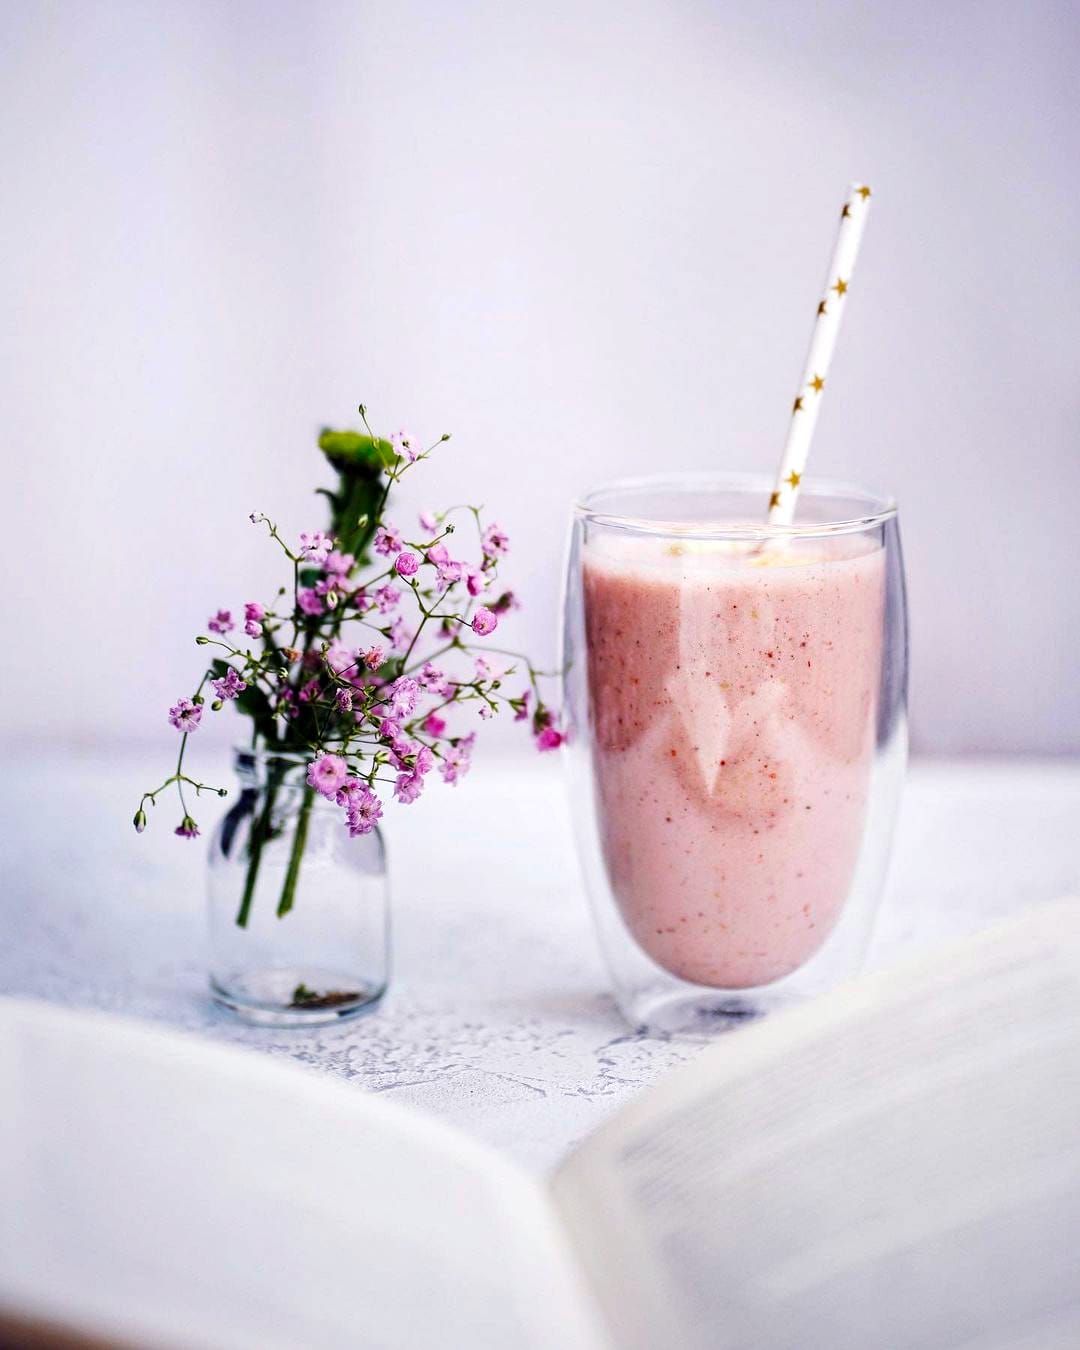 a nice smoothie to go along your Collagen Vital Power dose